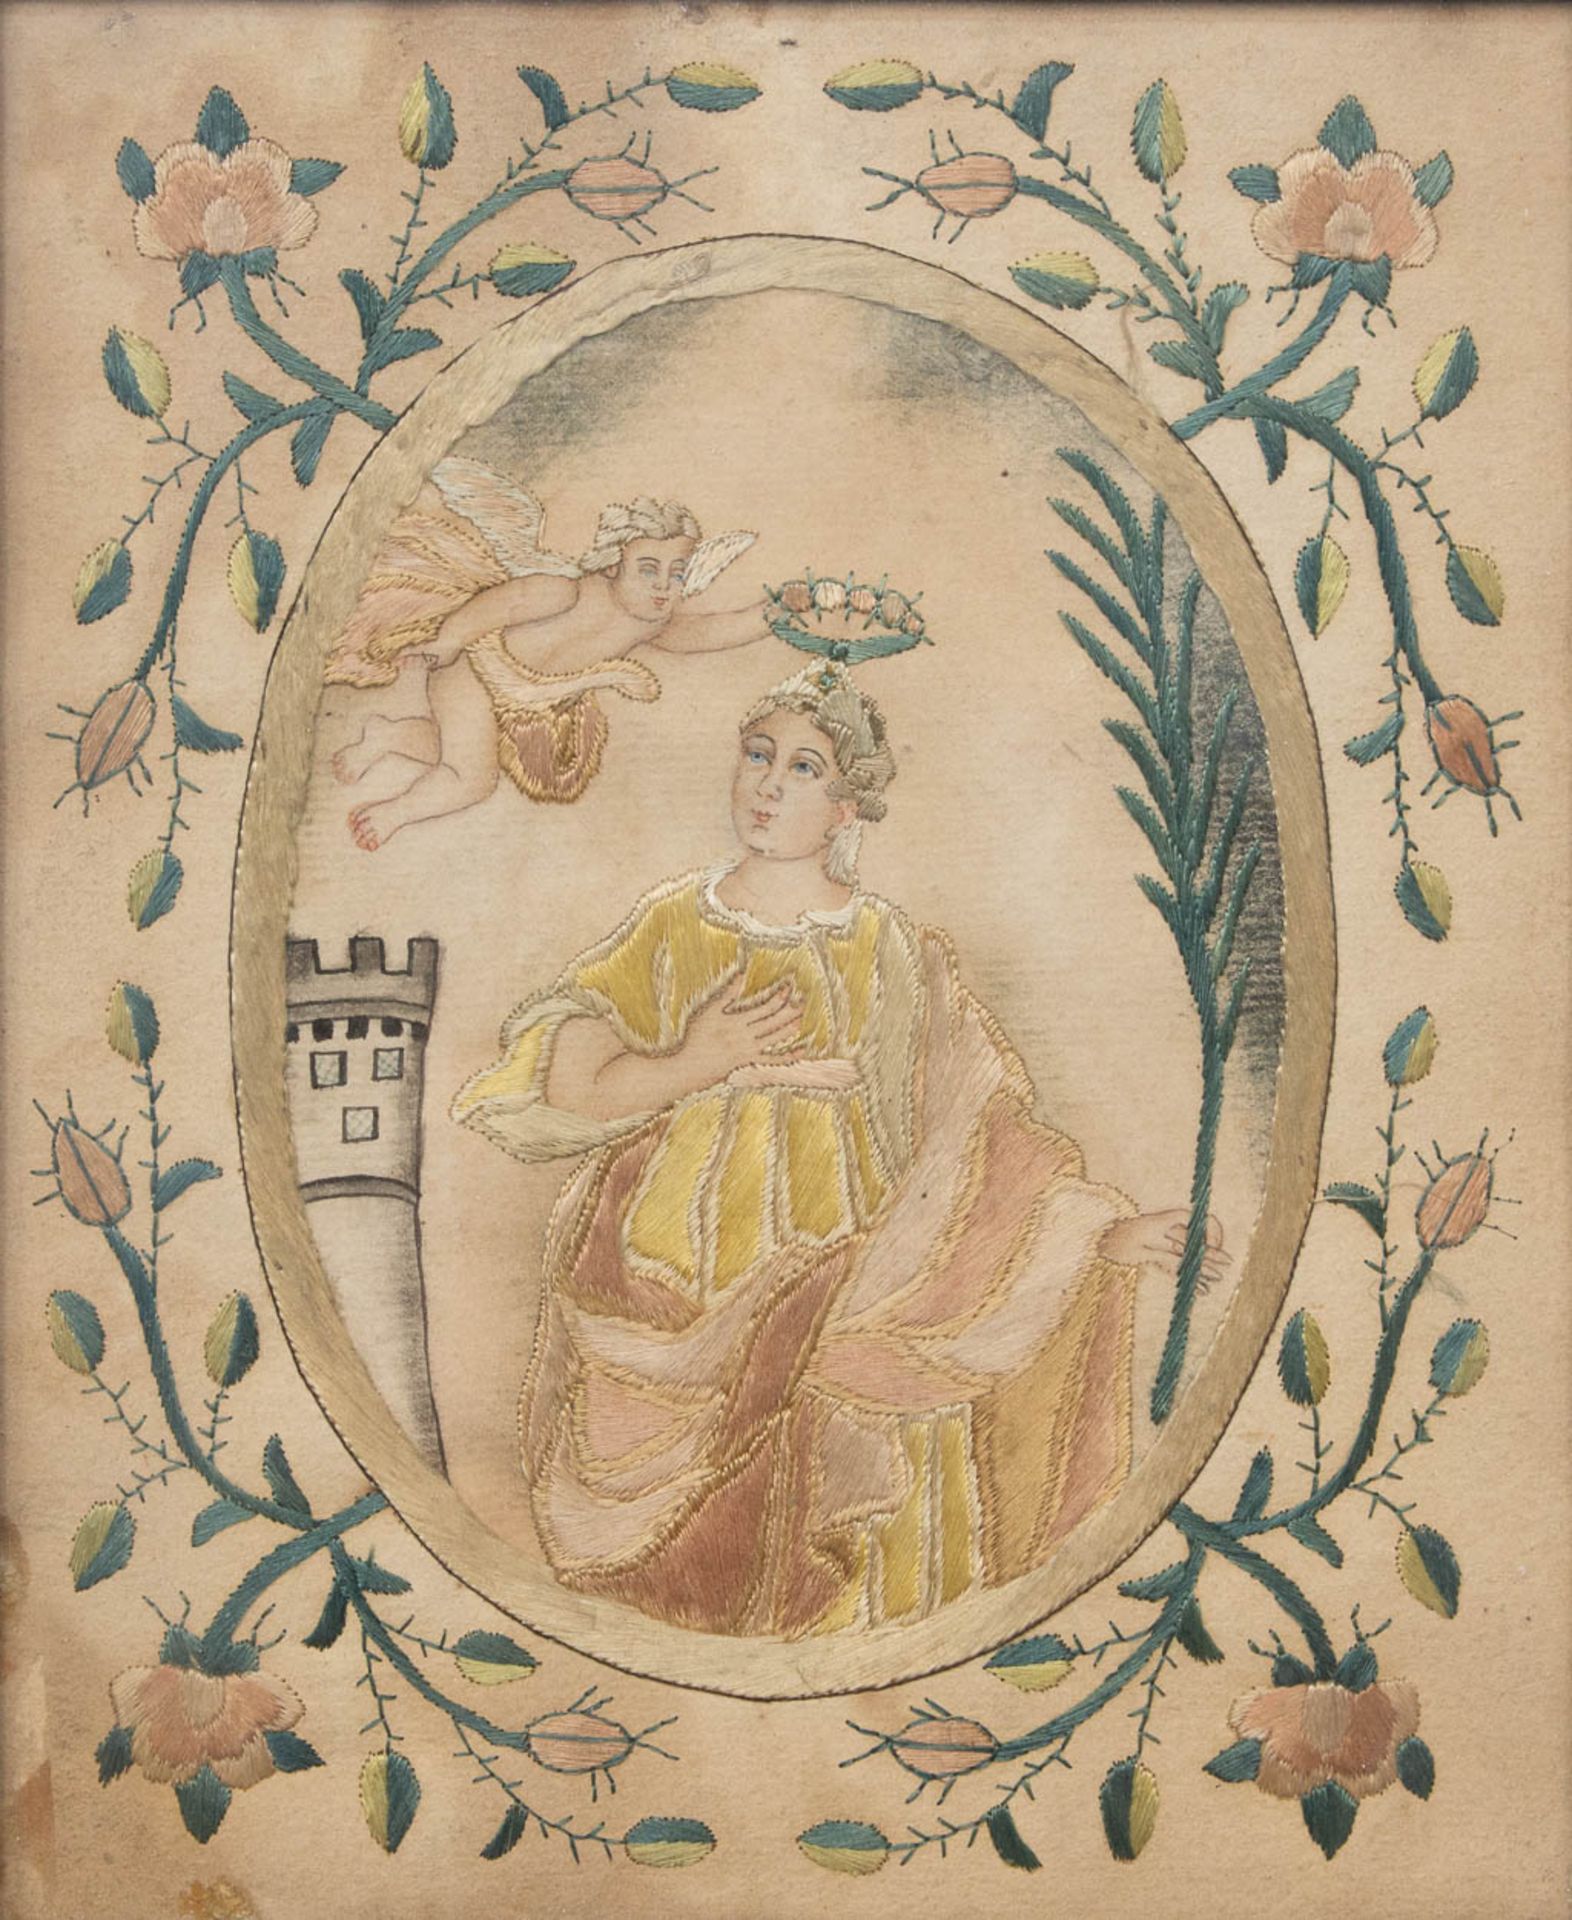 A double sided embroidery, silk thread on paper base, 19th century.